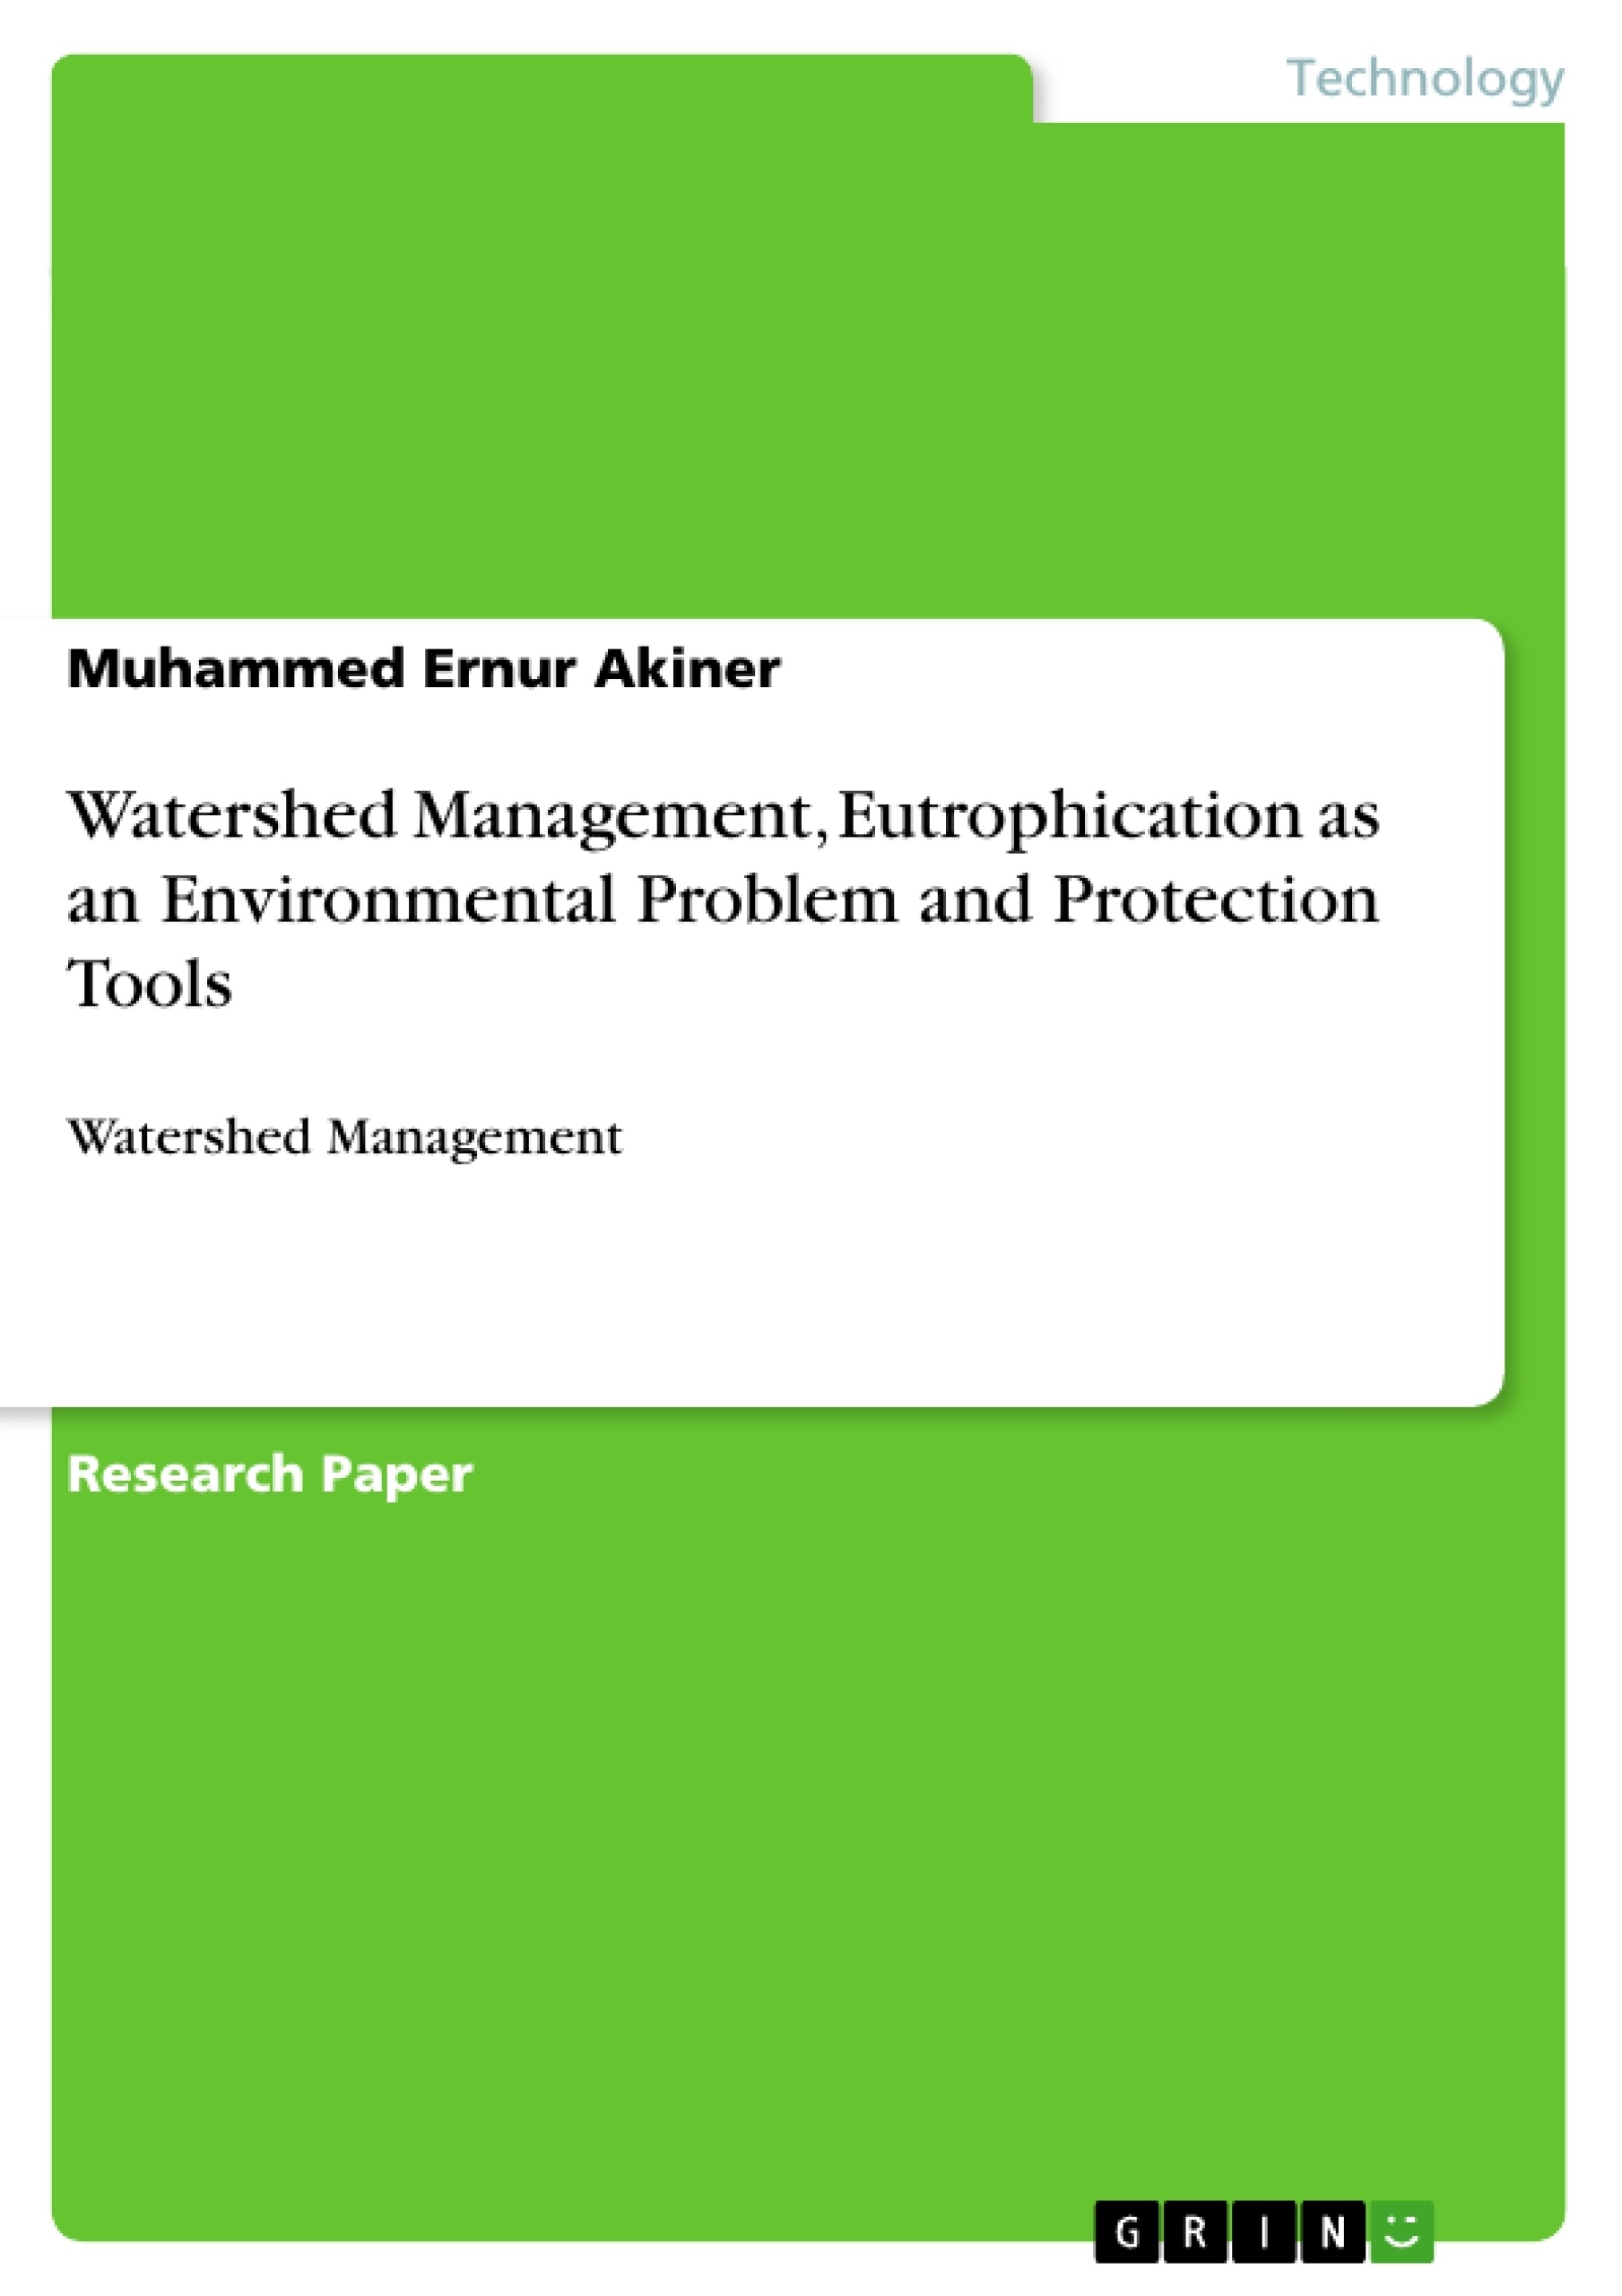 Title: Watershed Management, Eutrophication as an Environmental Problem and Protection Tools